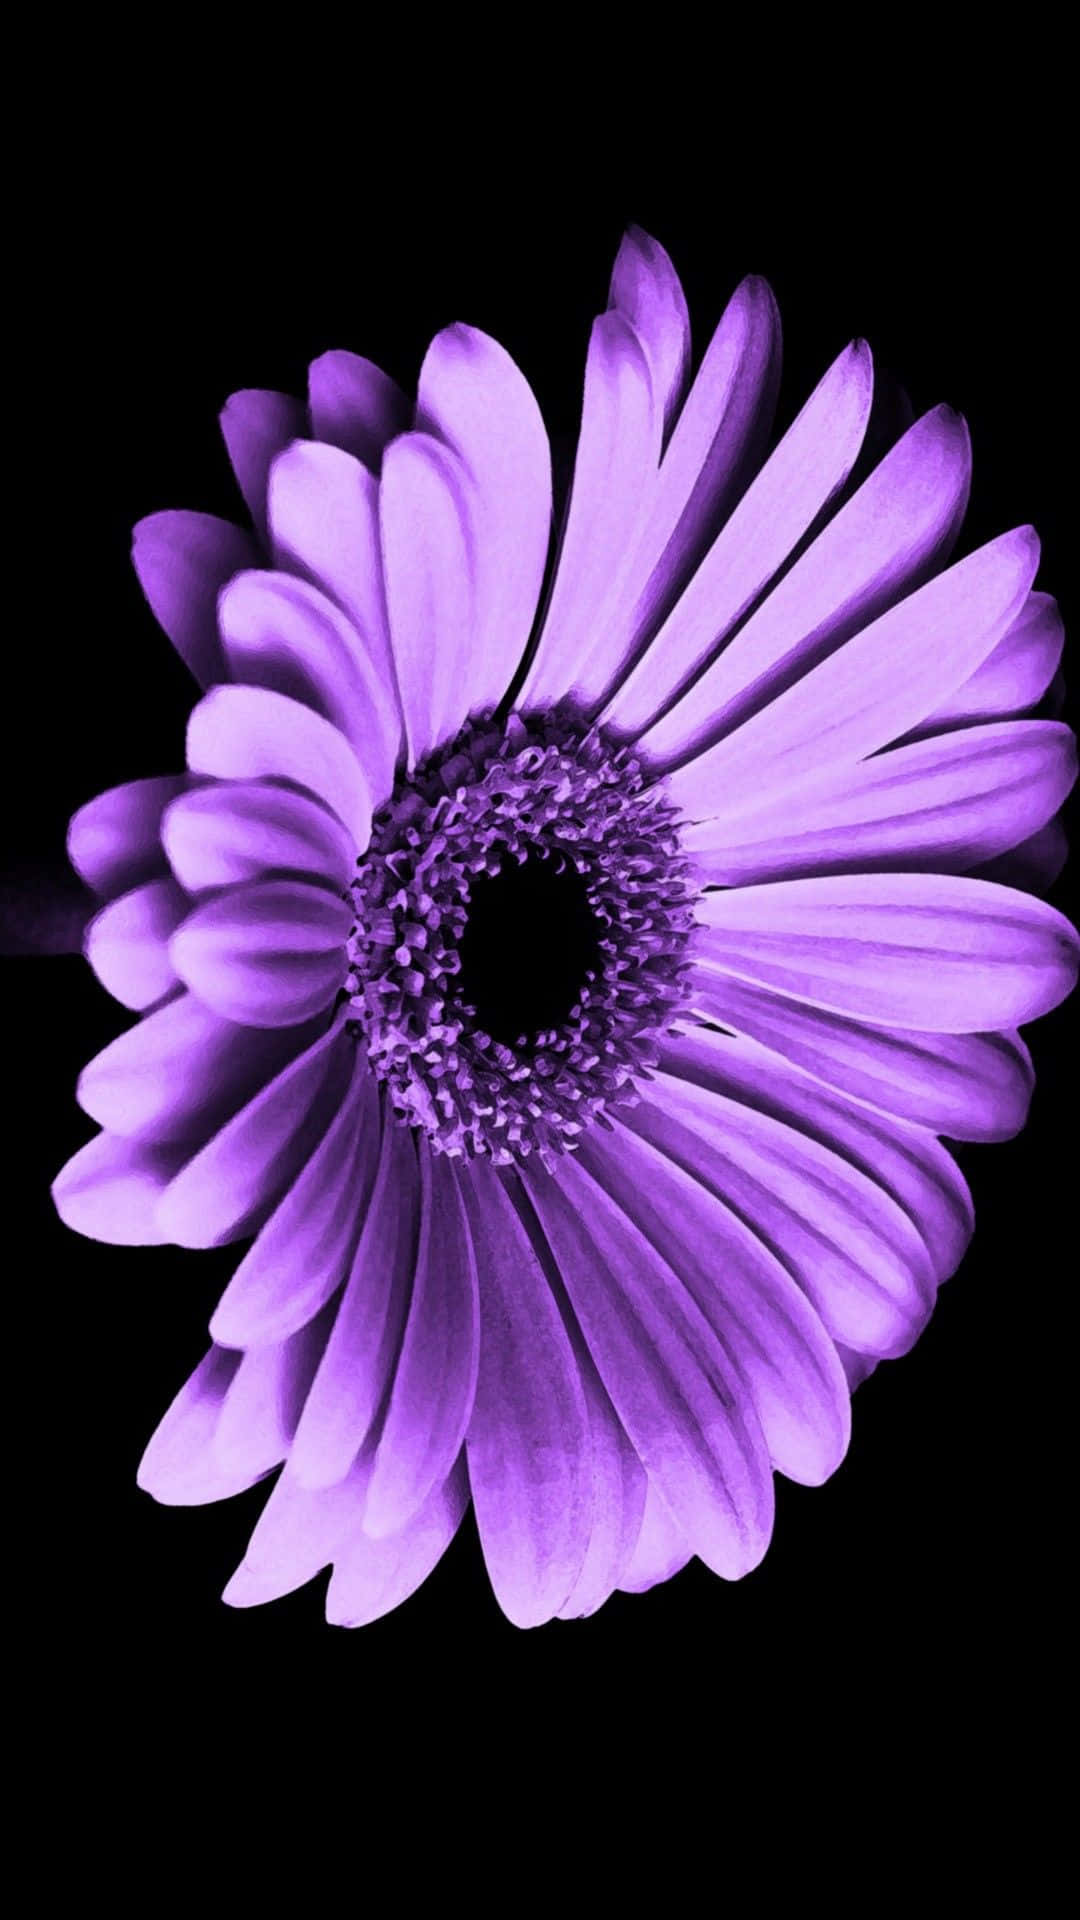 Unlock the joy of life with this Flower Iphone wallpaper